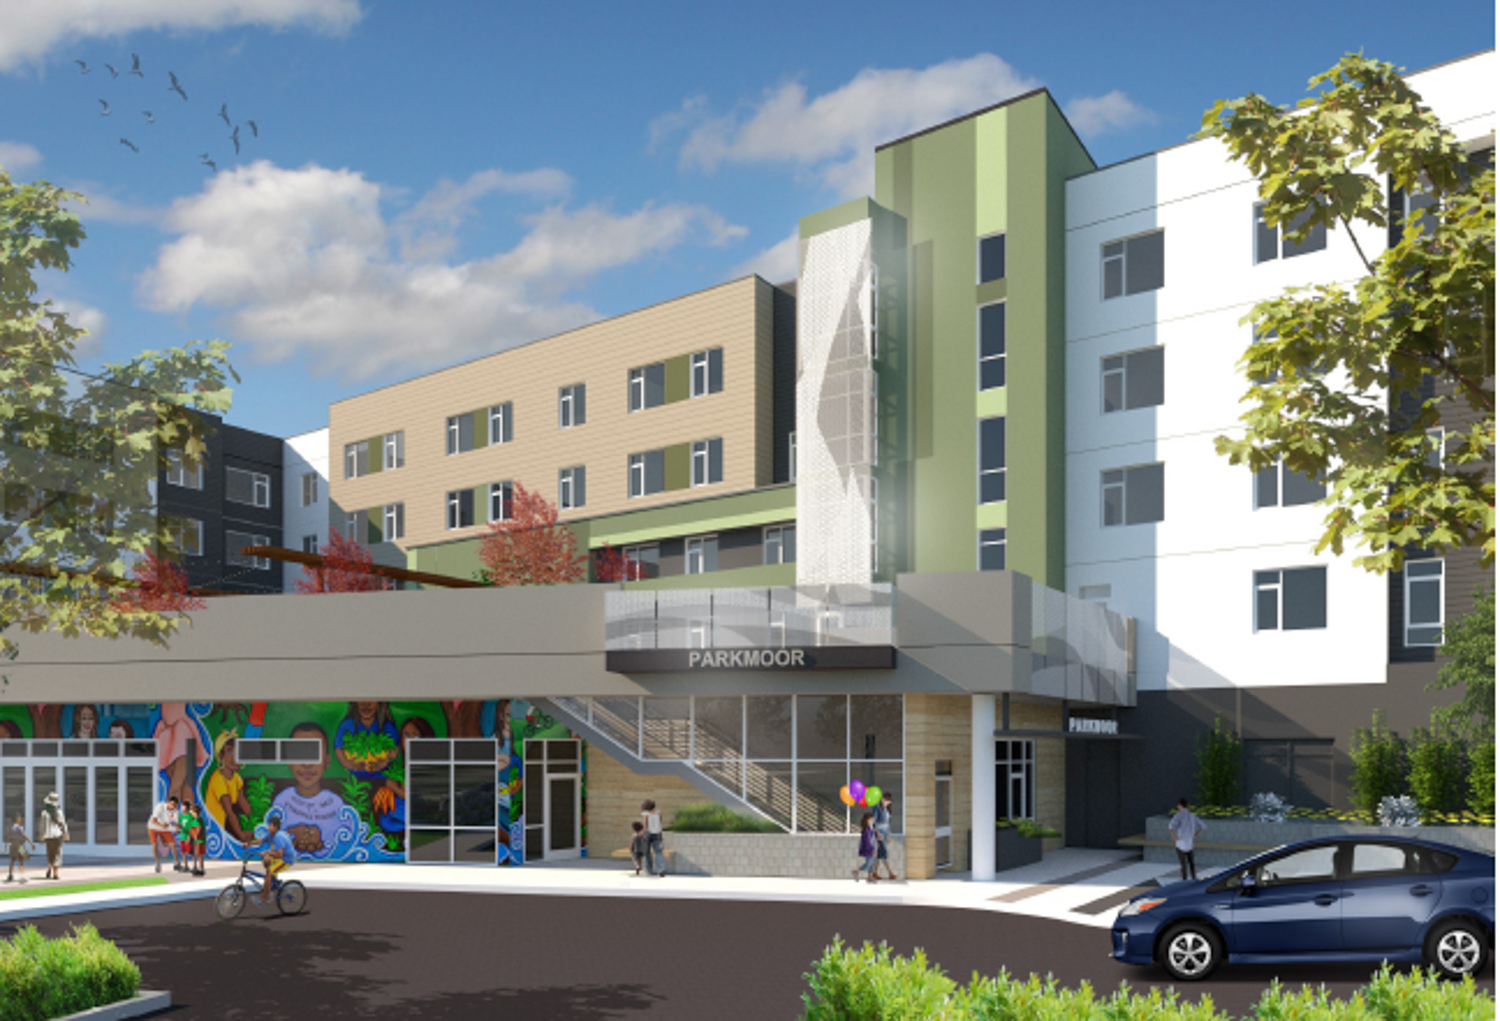 1510 Parkmoor Avenue entrance, rendering by Santa Clara County Office of Supportive Housing.